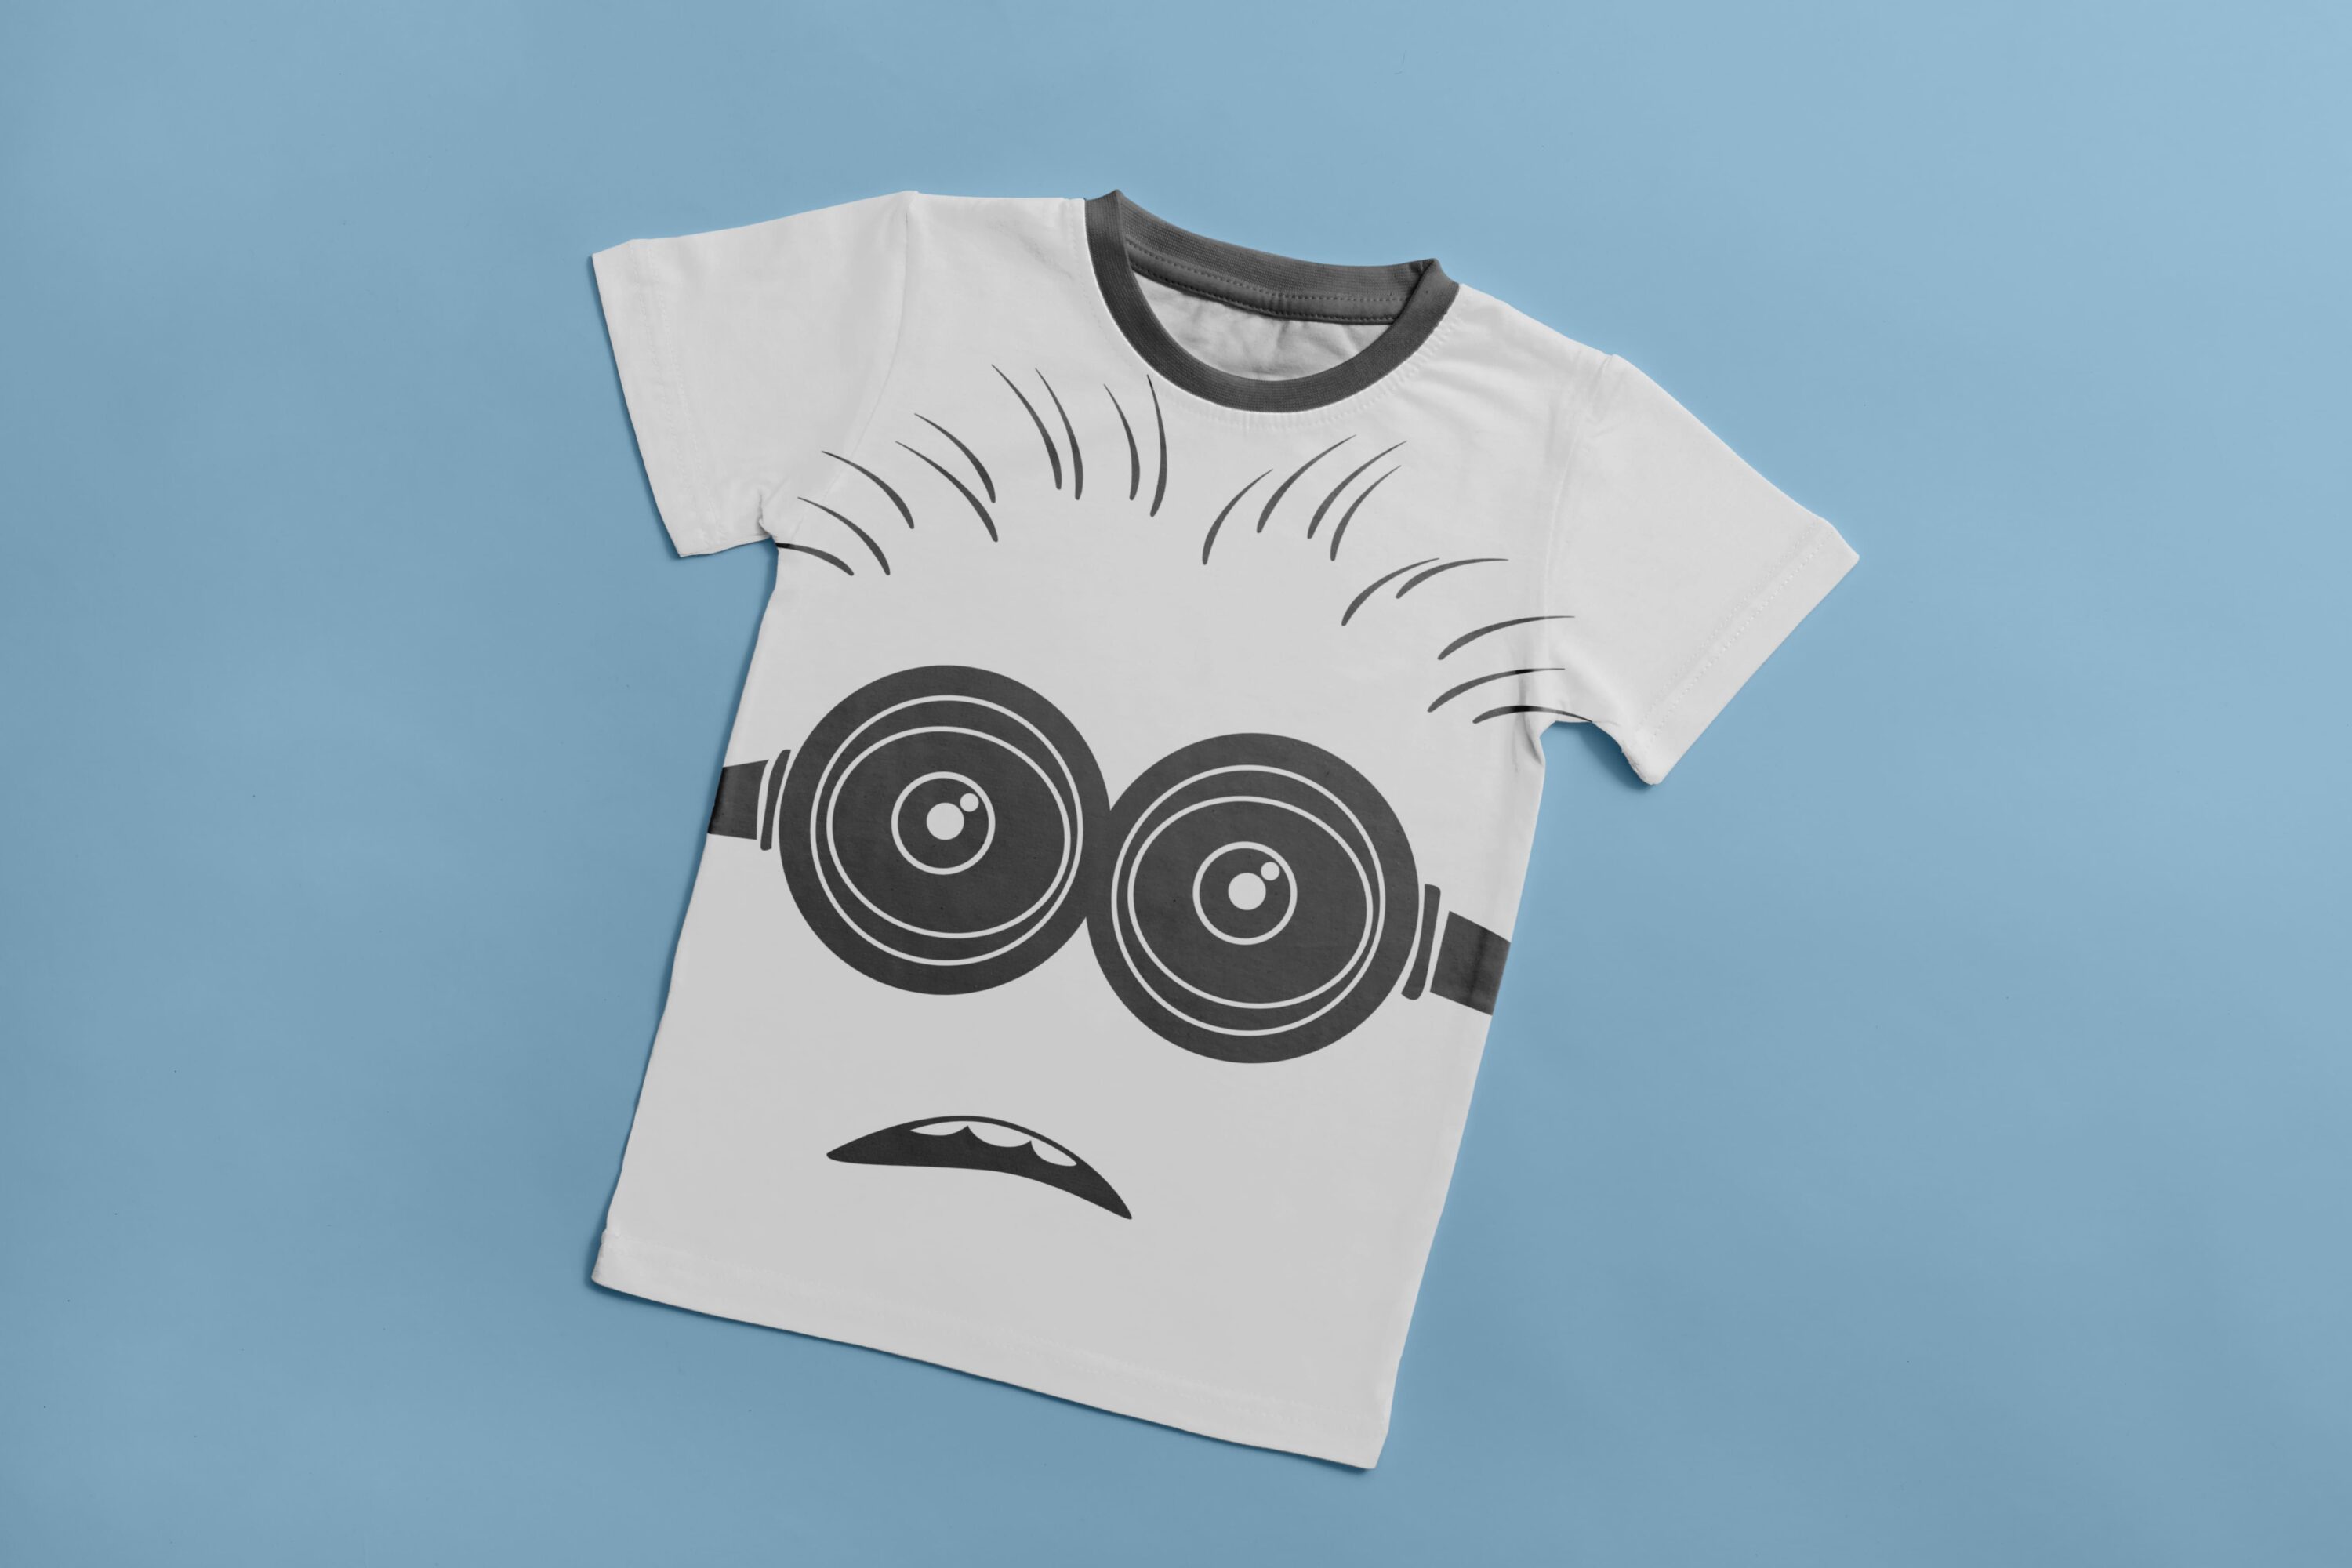 A white T-shirt with a gray collar and a gray silhouette of a puzzled minion.